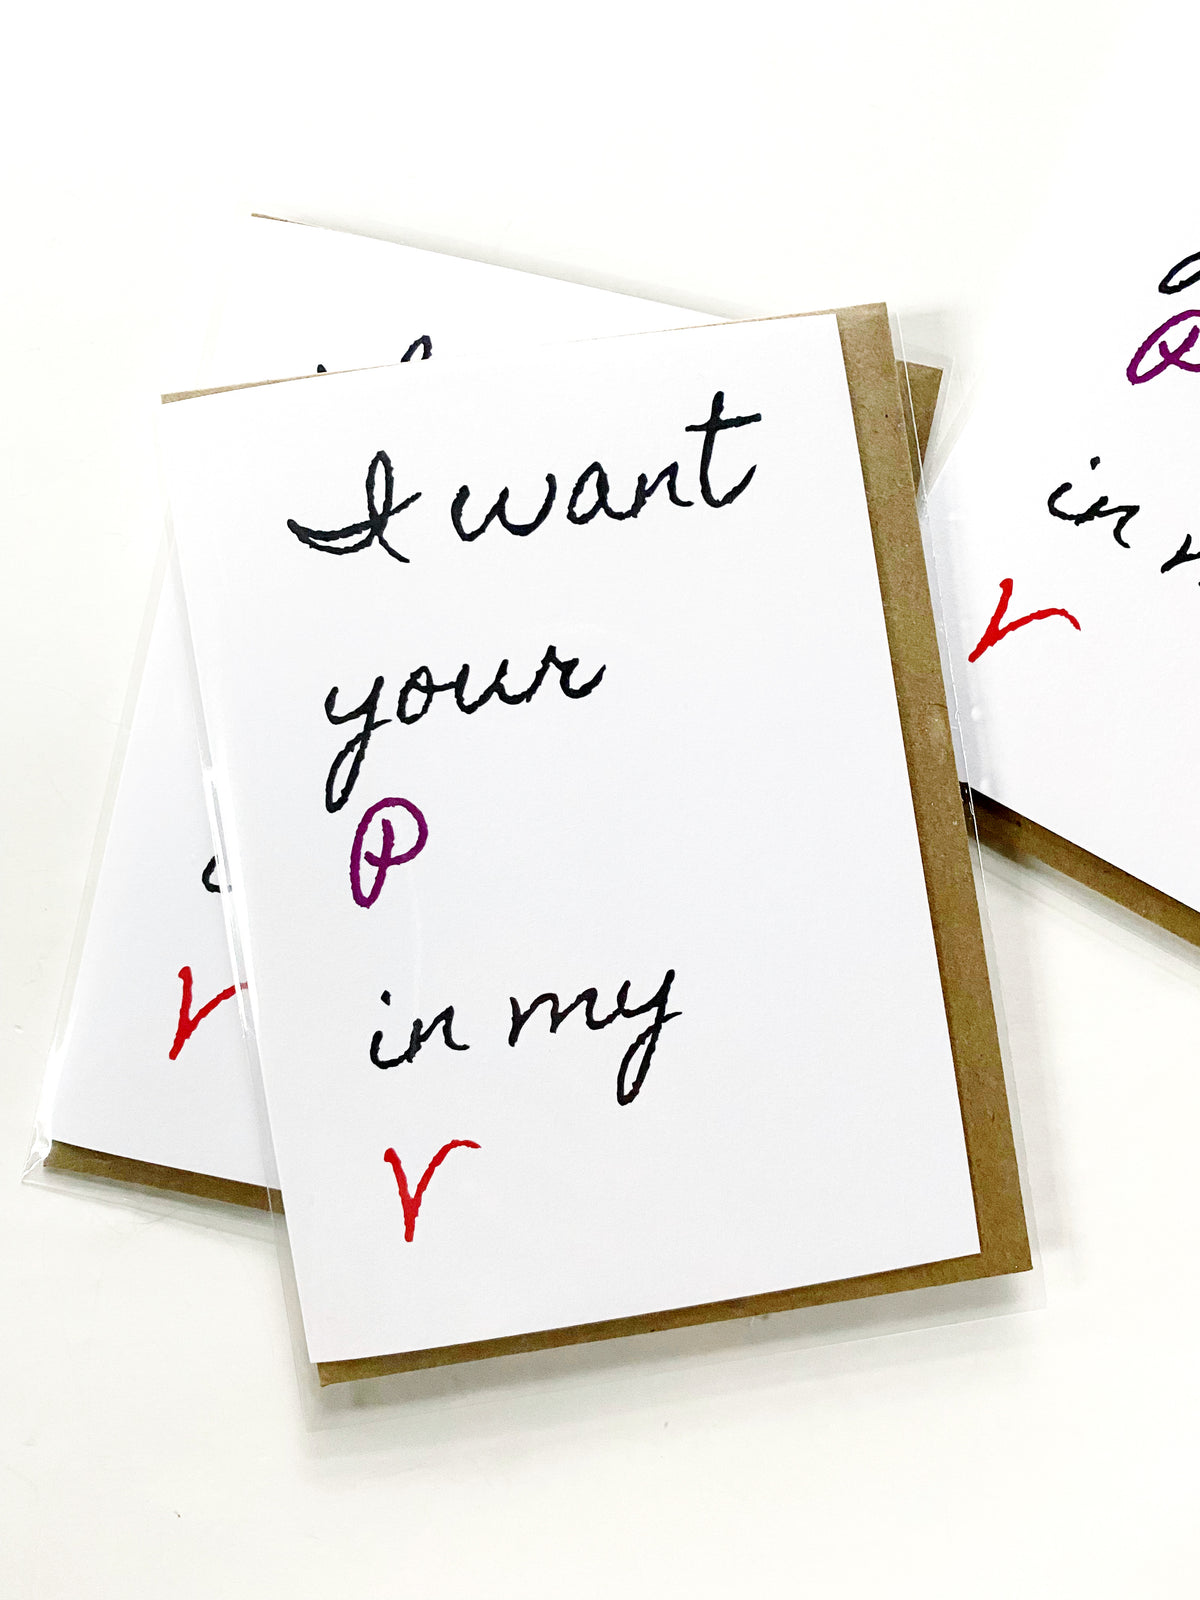 Funny Love Card I Want Your P in my V